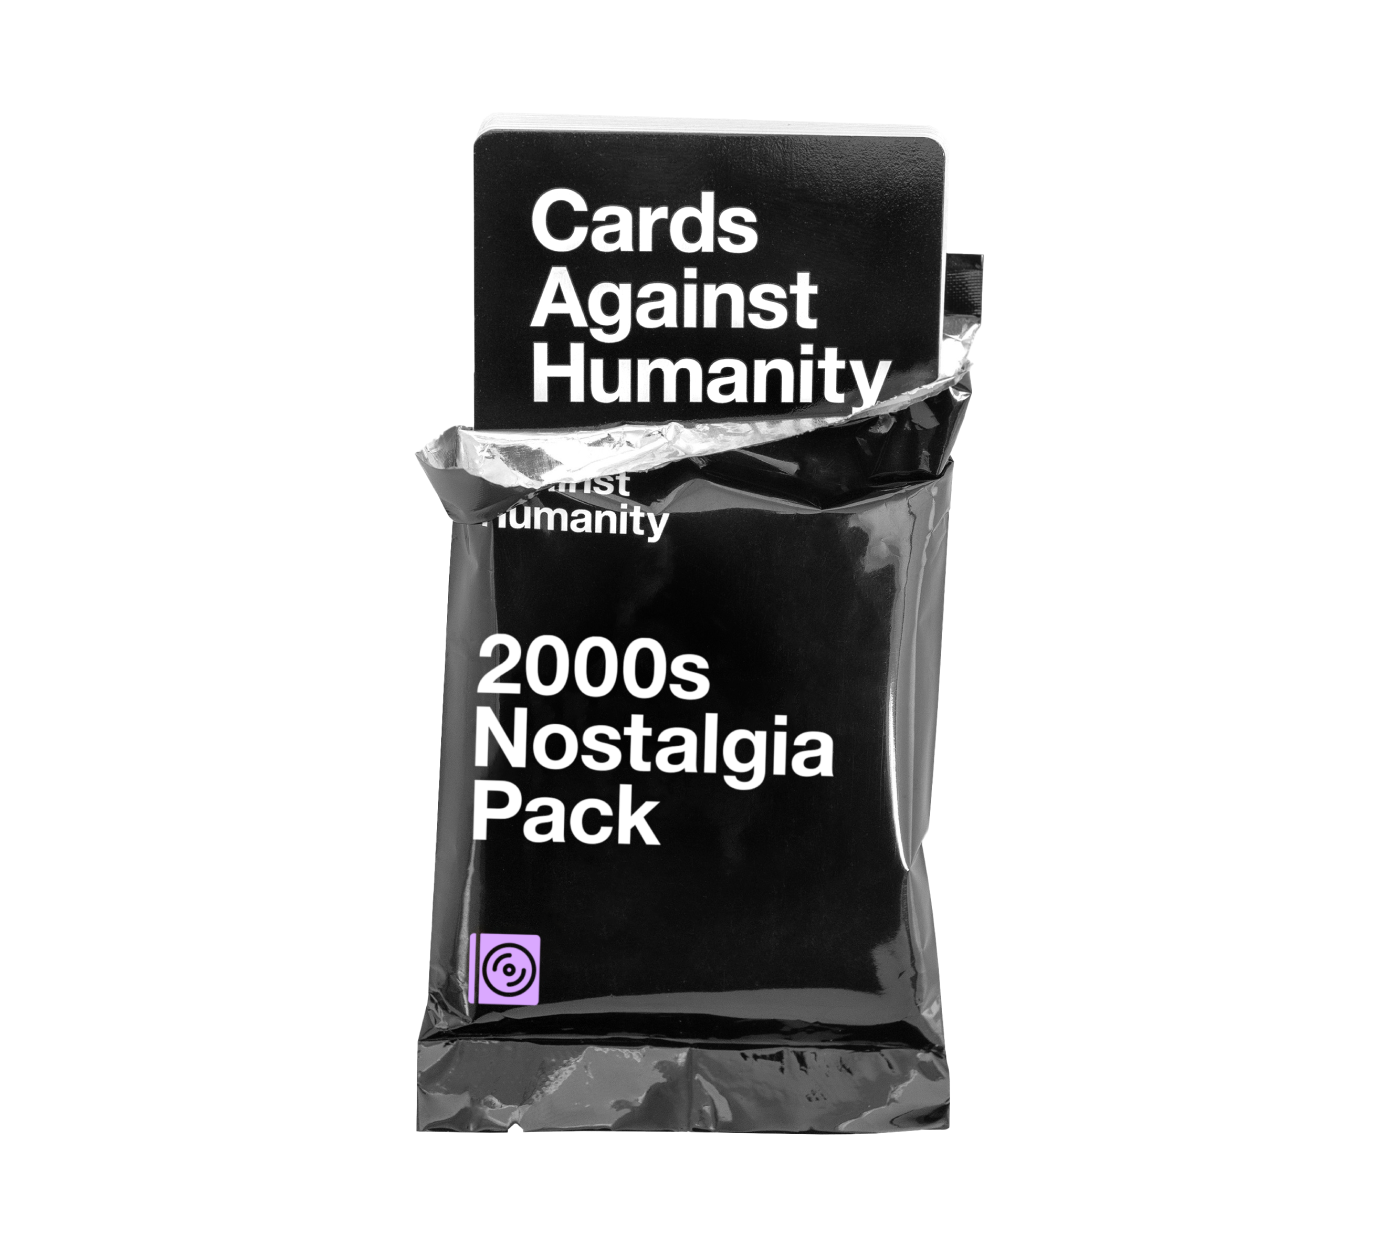 2000s Nostalgia Pack Cards Against Humanity 